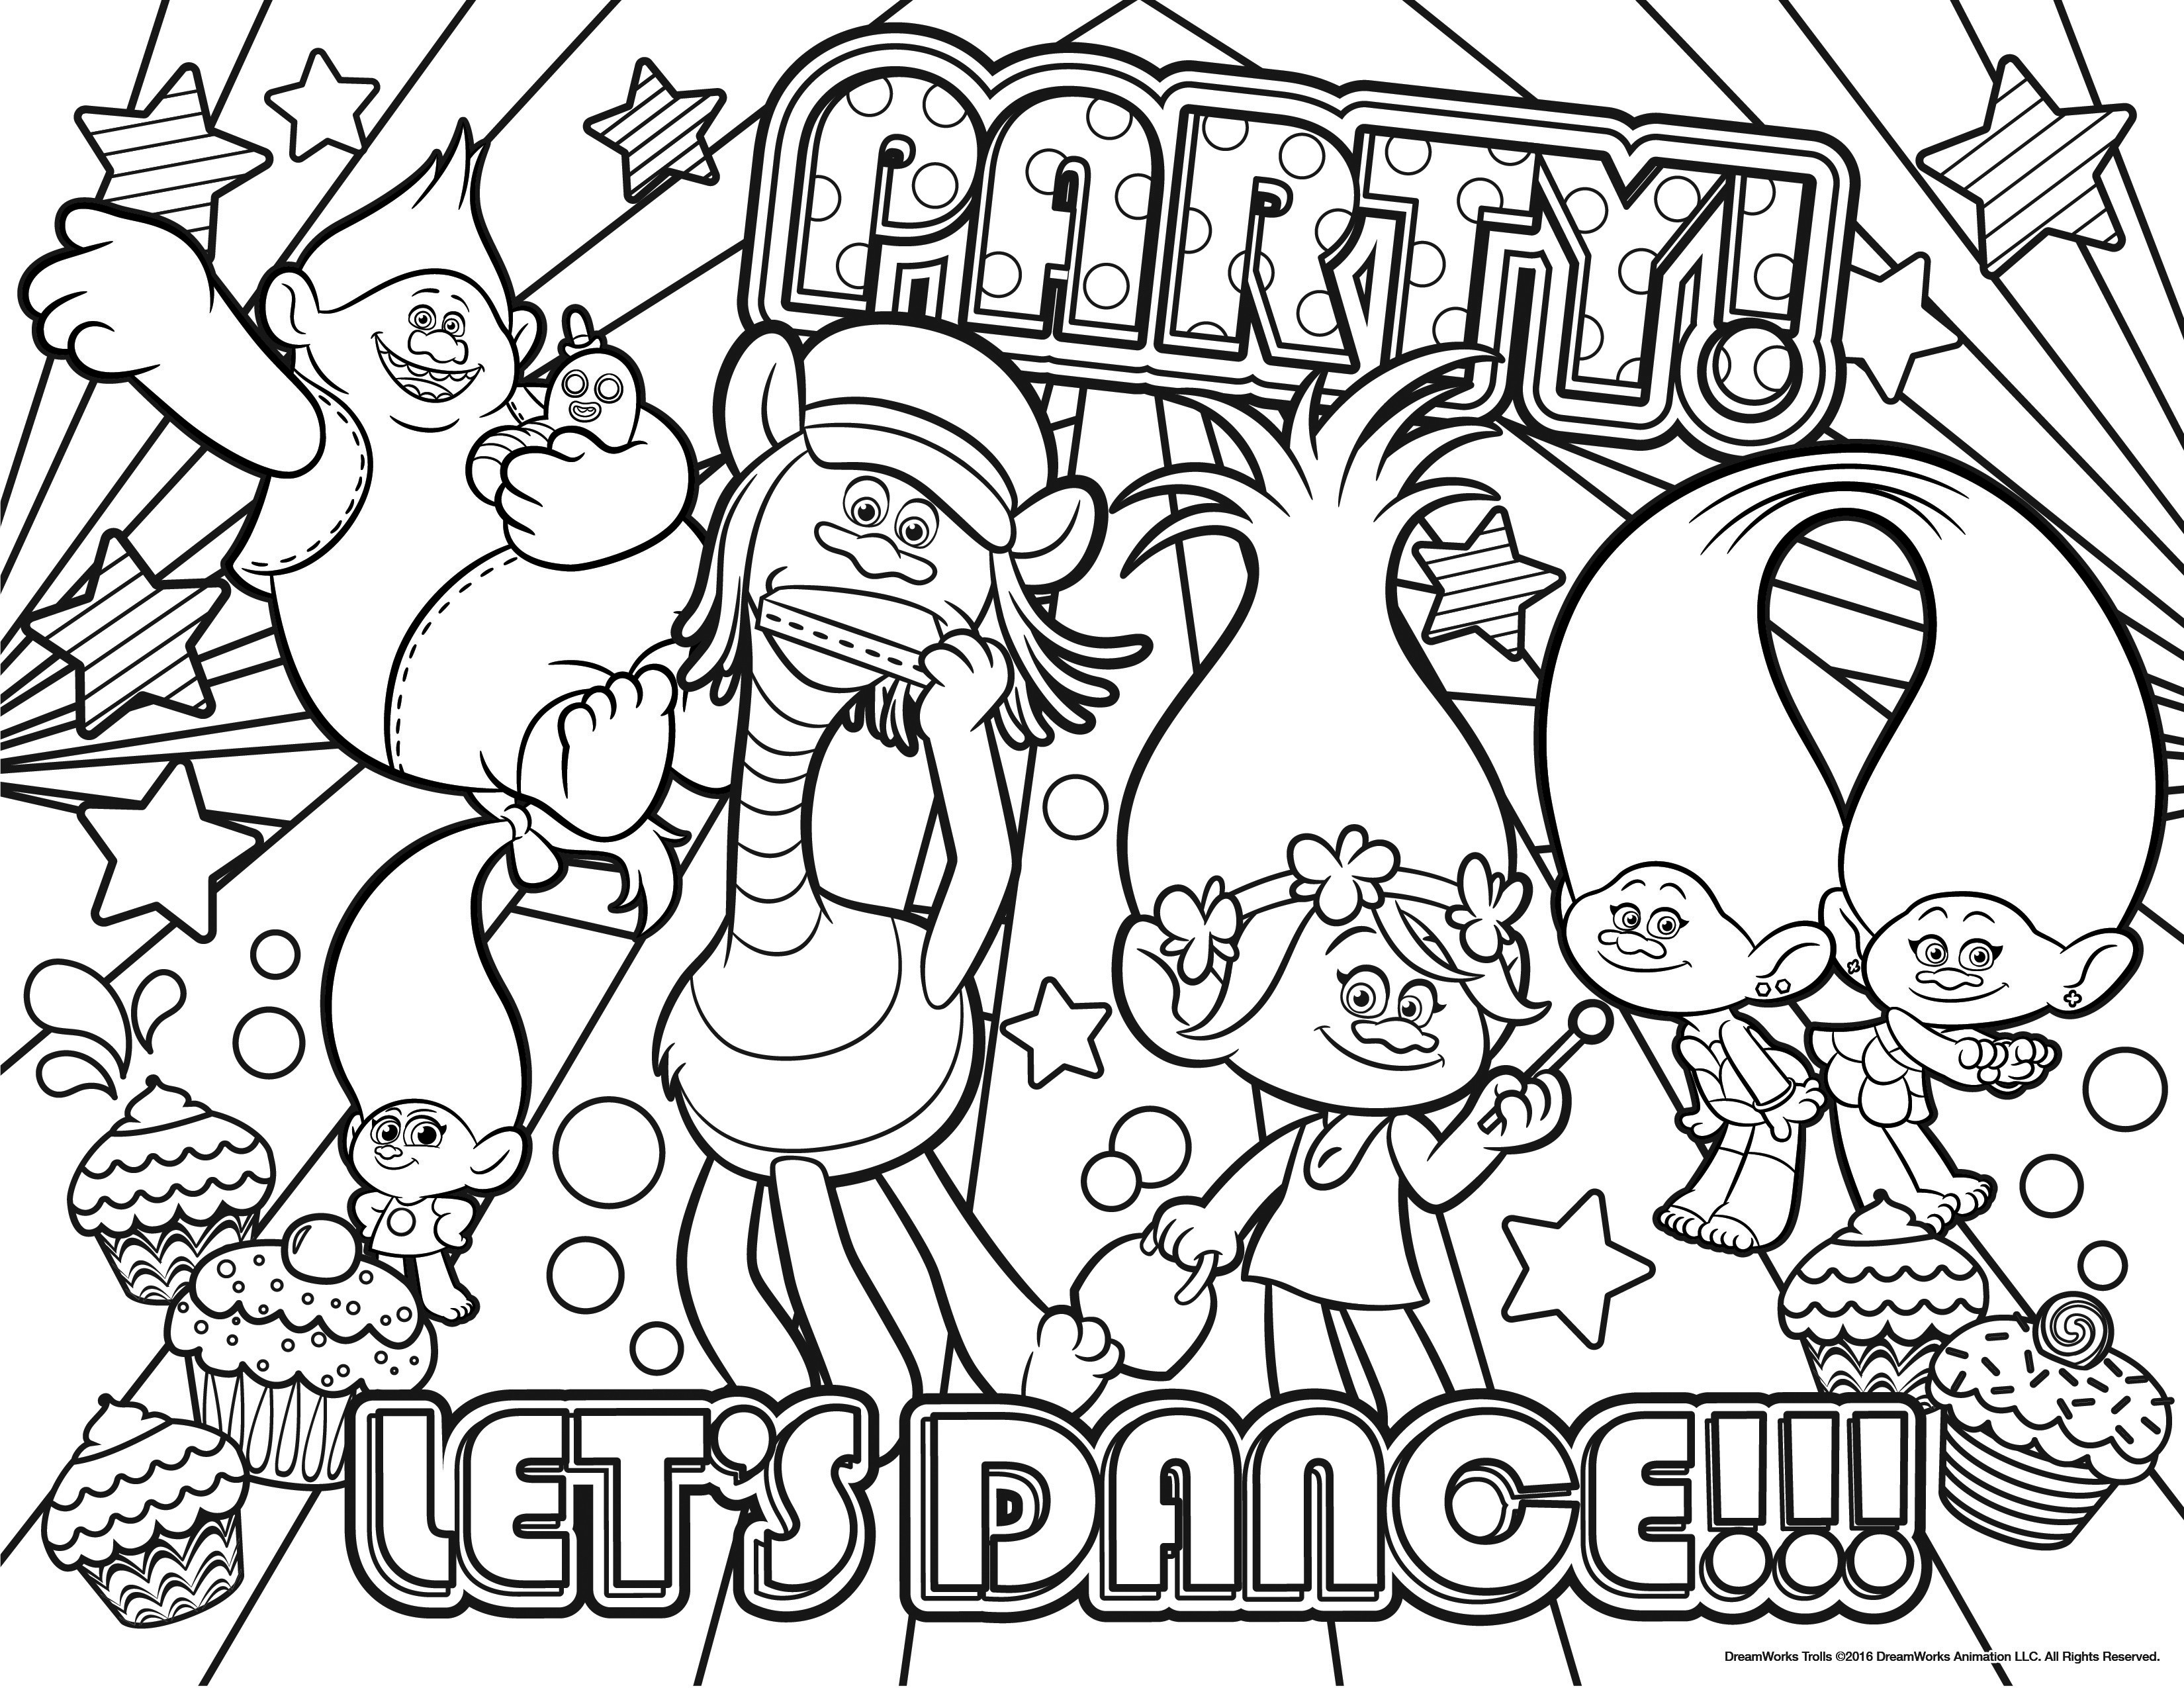 Troll Coloring Pages New Free Disney Trolls Printable Design 3300 - Free Printable Troll Coloring Pages